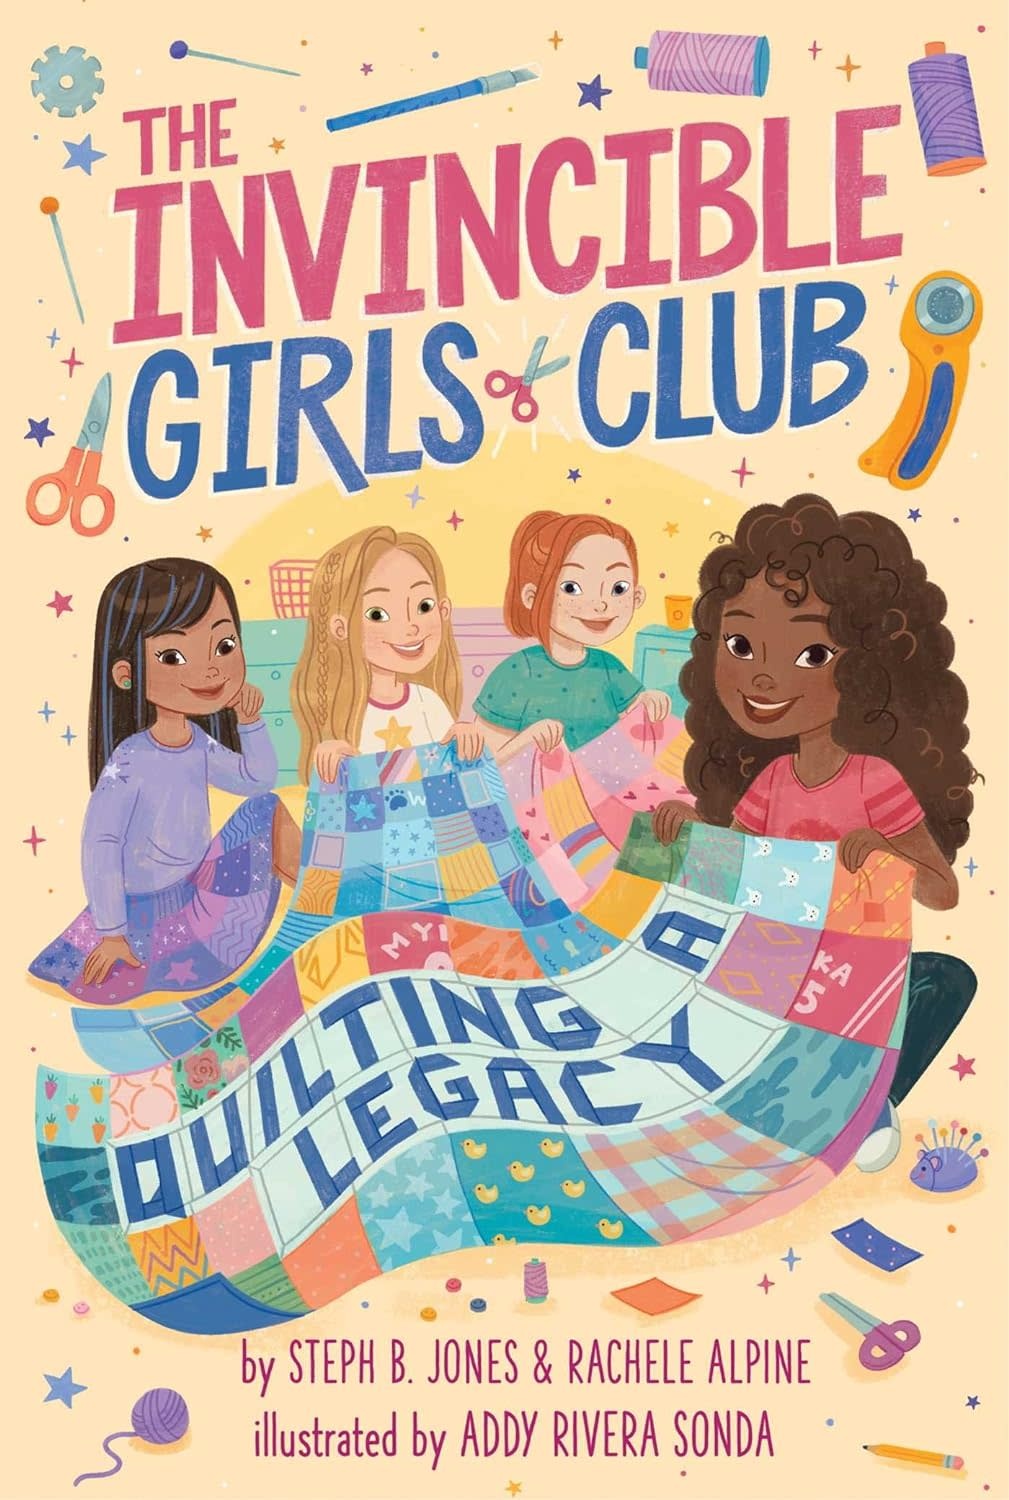 The Invincible Girls Club